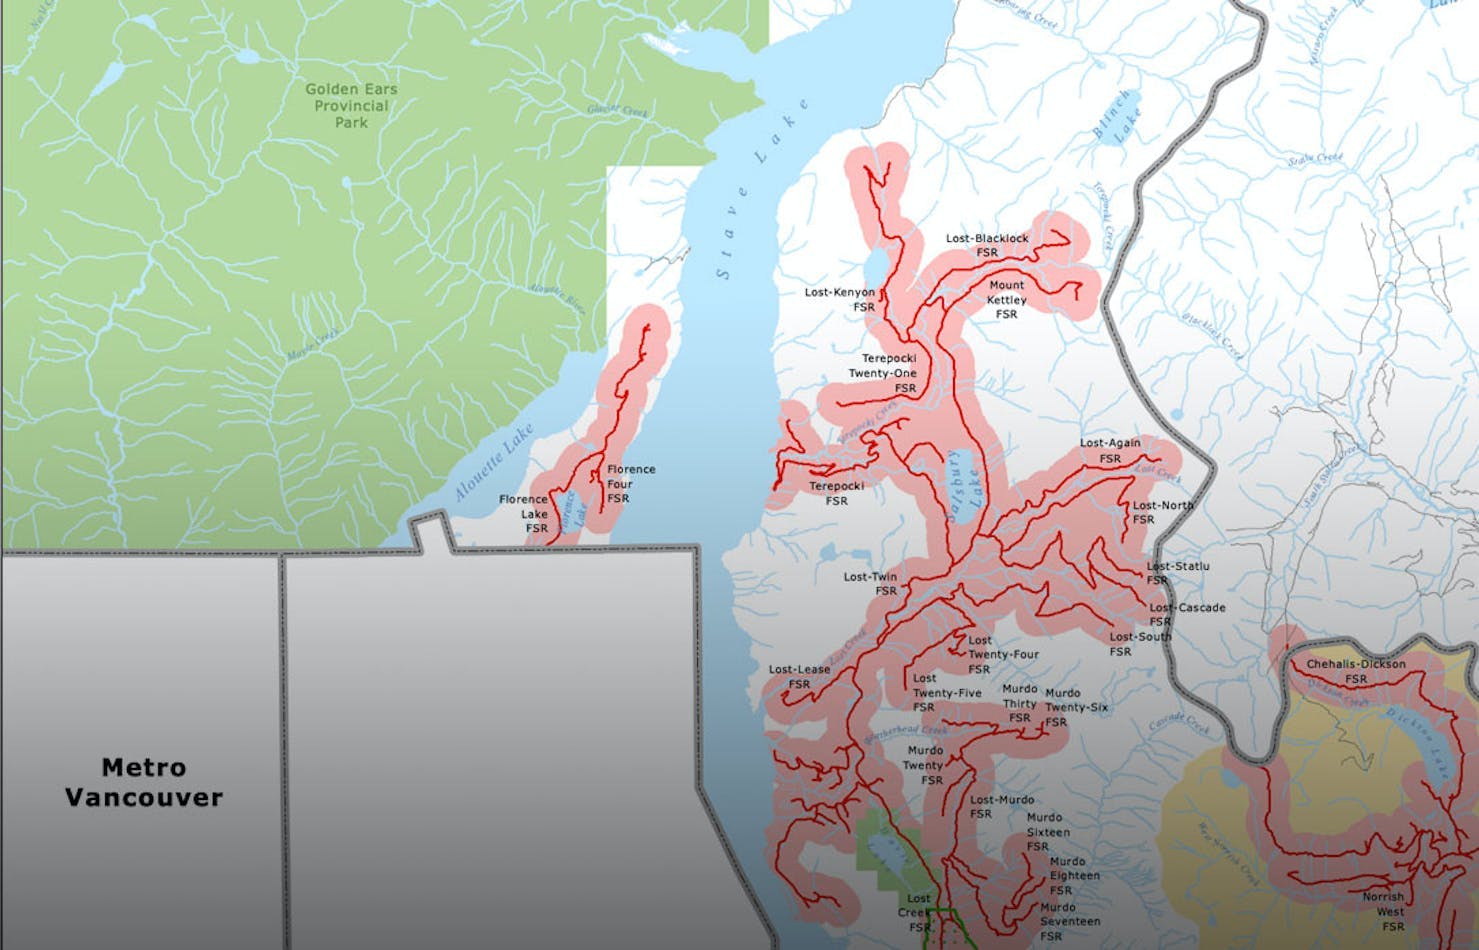 Legal shooting areas in the Lower Mainland